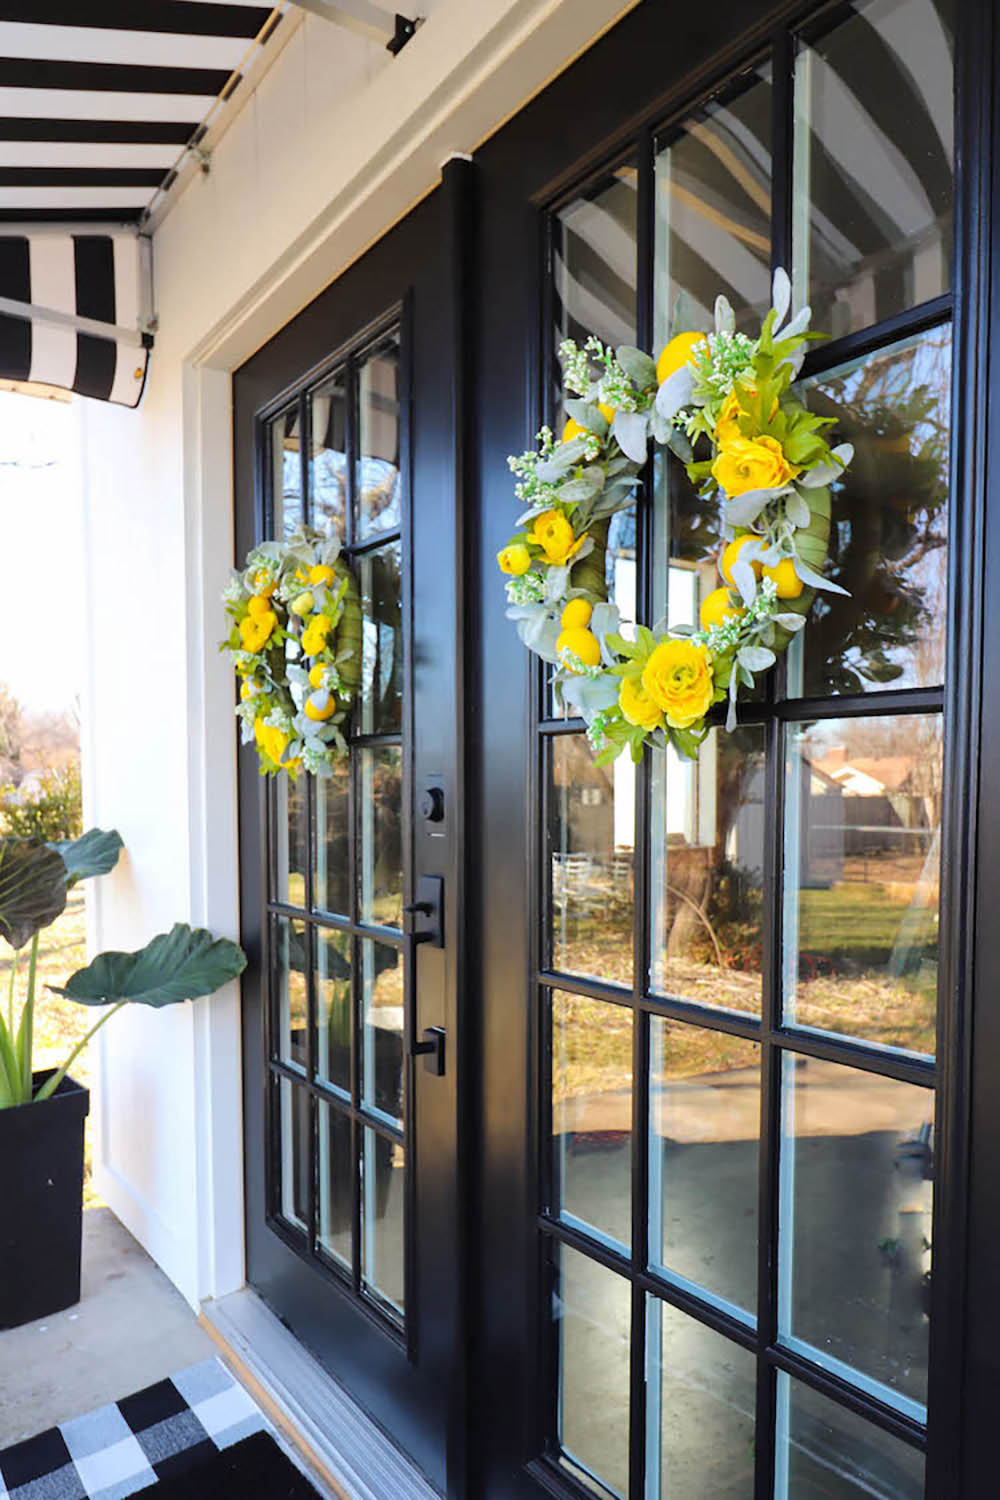 A set of black and glass patio doors with colorful wreaths.